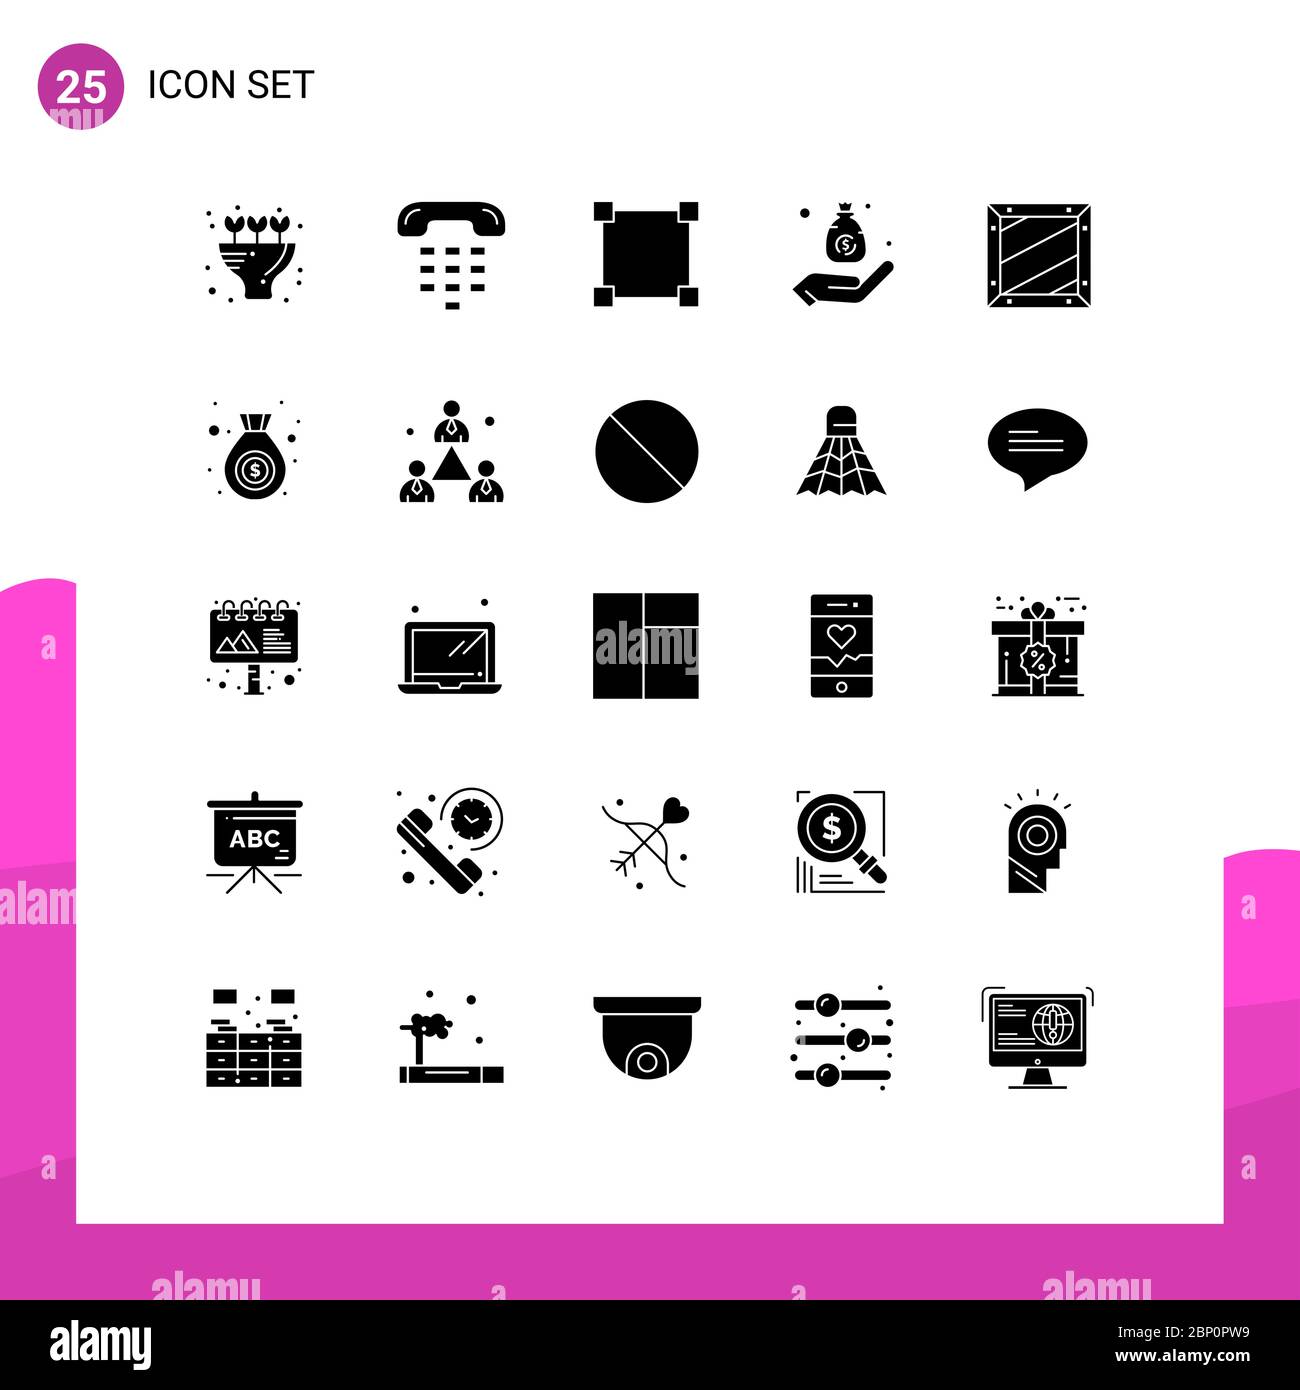 Pictogram Set of 25 Simple Solid Glyphs of coding, hand, path, finance, budget Editable Vector Design Elements Stock Vector